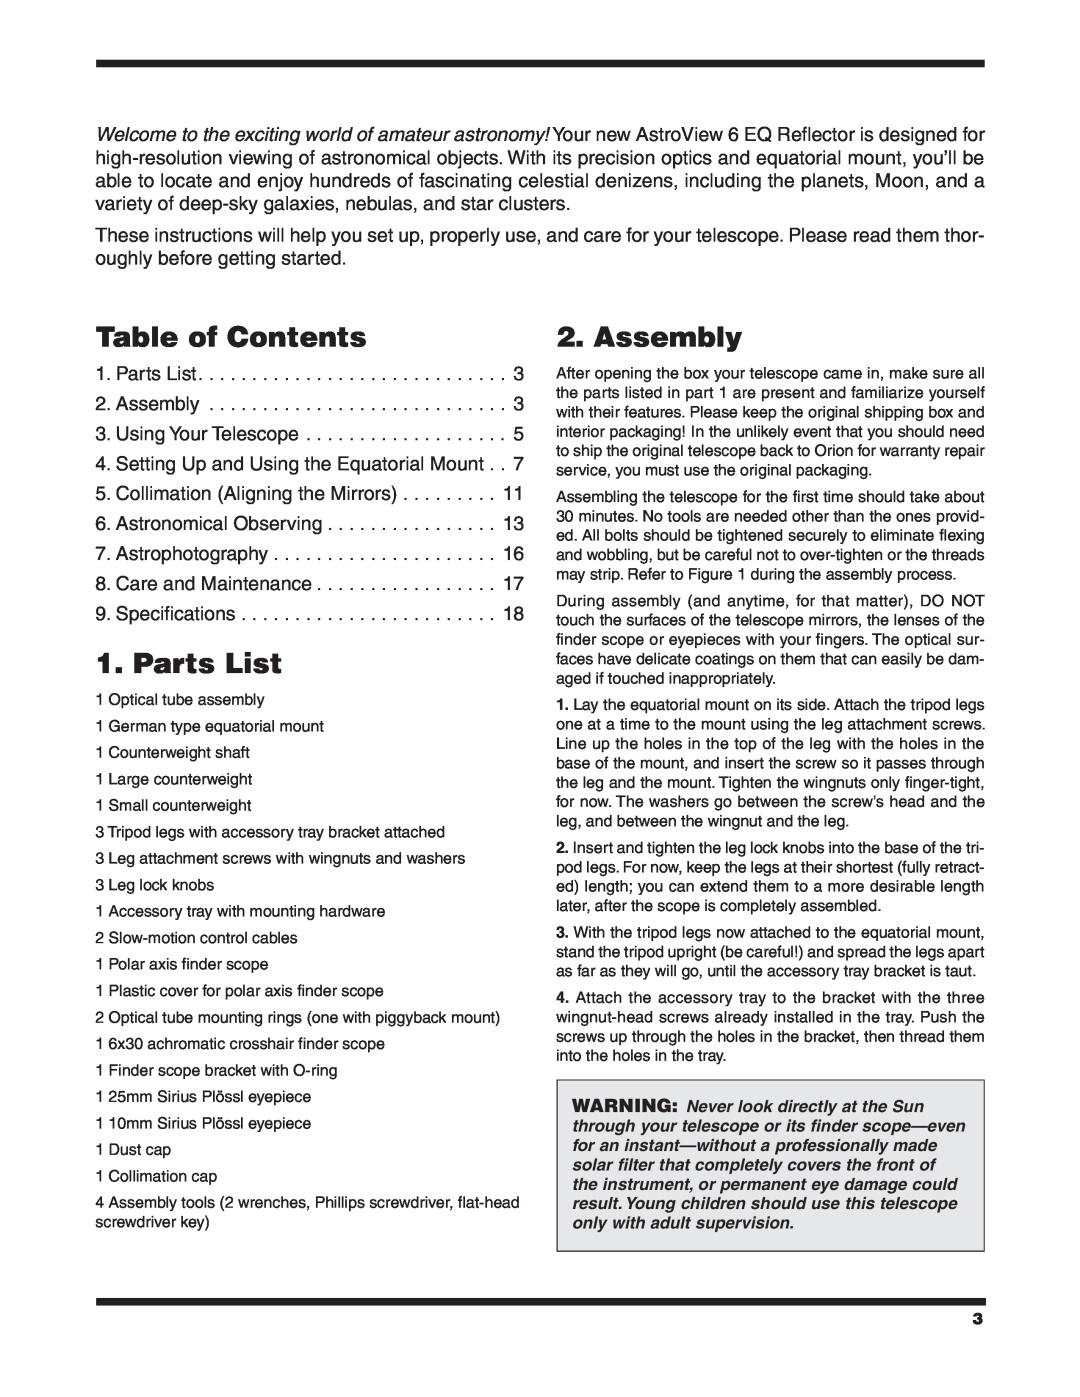 Orion 9827 instruction manual Table of Contents, Parts List 2. Assembly 3. Using Your Telescope 